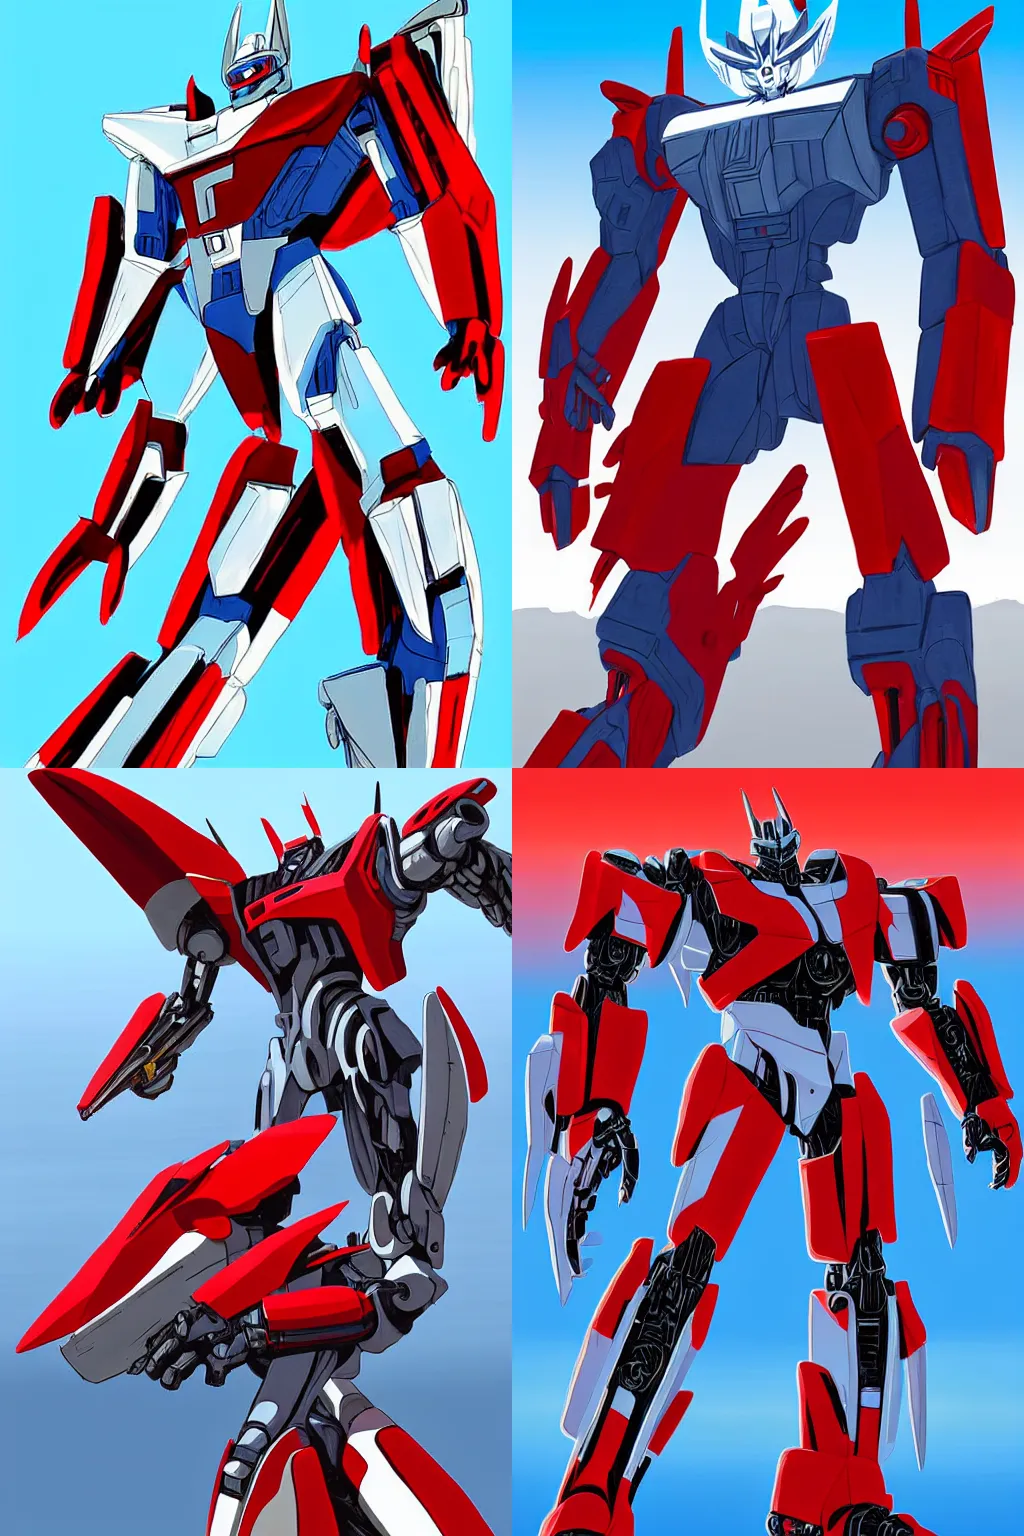 Prompt: Character Portrait of Jetfire from Transformers on a clear sunny day and a blue sky standing in the bonneville salt flats, red and white color scheme, digital painting, concept art, giant robot, pacific rim, glowing eyes, Jetfire!!!!!, Jet parts, Intricate, Highly Detailed, Transformers!!!!!!!!!!!!!, Skyfire, Battroid Mode, Zone of Enders, Genesis of Aquarion, Aquarion, Anime Robots, Character Splash Art, Jet Wings on the back, Mecha Anime, Anime, Robots, Robot, Robot Mode, 8k, ultra realistic, illustration, splash art, rule of thirds, good value control, John Singer Sargent, William-Adolphe Bouguereau, Yoshifumi Ushima, Takeyuki Kanda, Shotaro Ishinomori, Ken Ishikawa, Umanosuke Iida